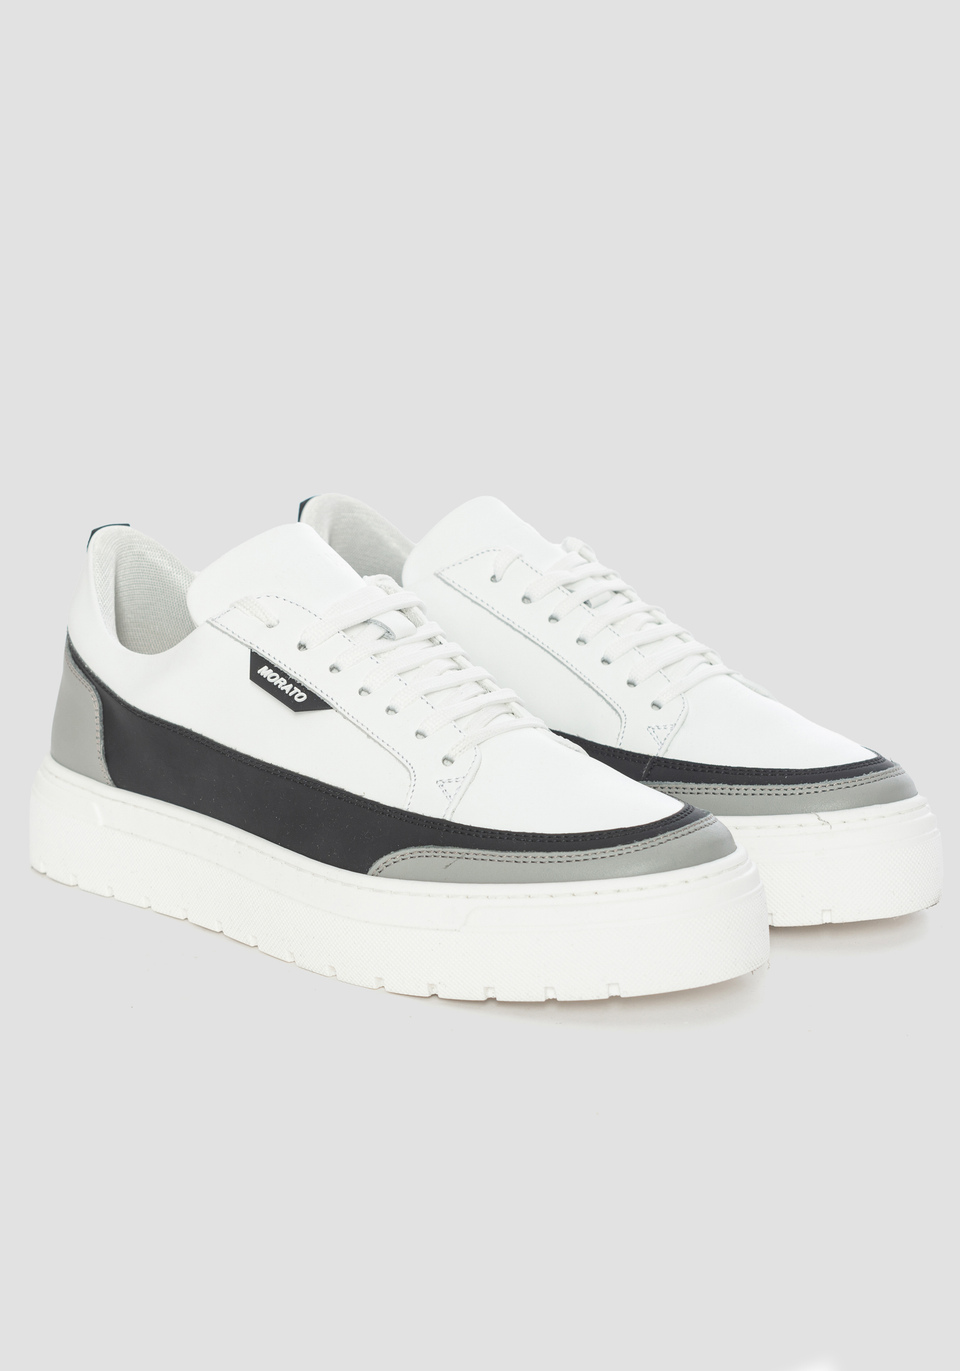 “FLINT” SNEAKERS IN LEATHER AND RUBBERISED FABRIC - Antony Morato Online Shop